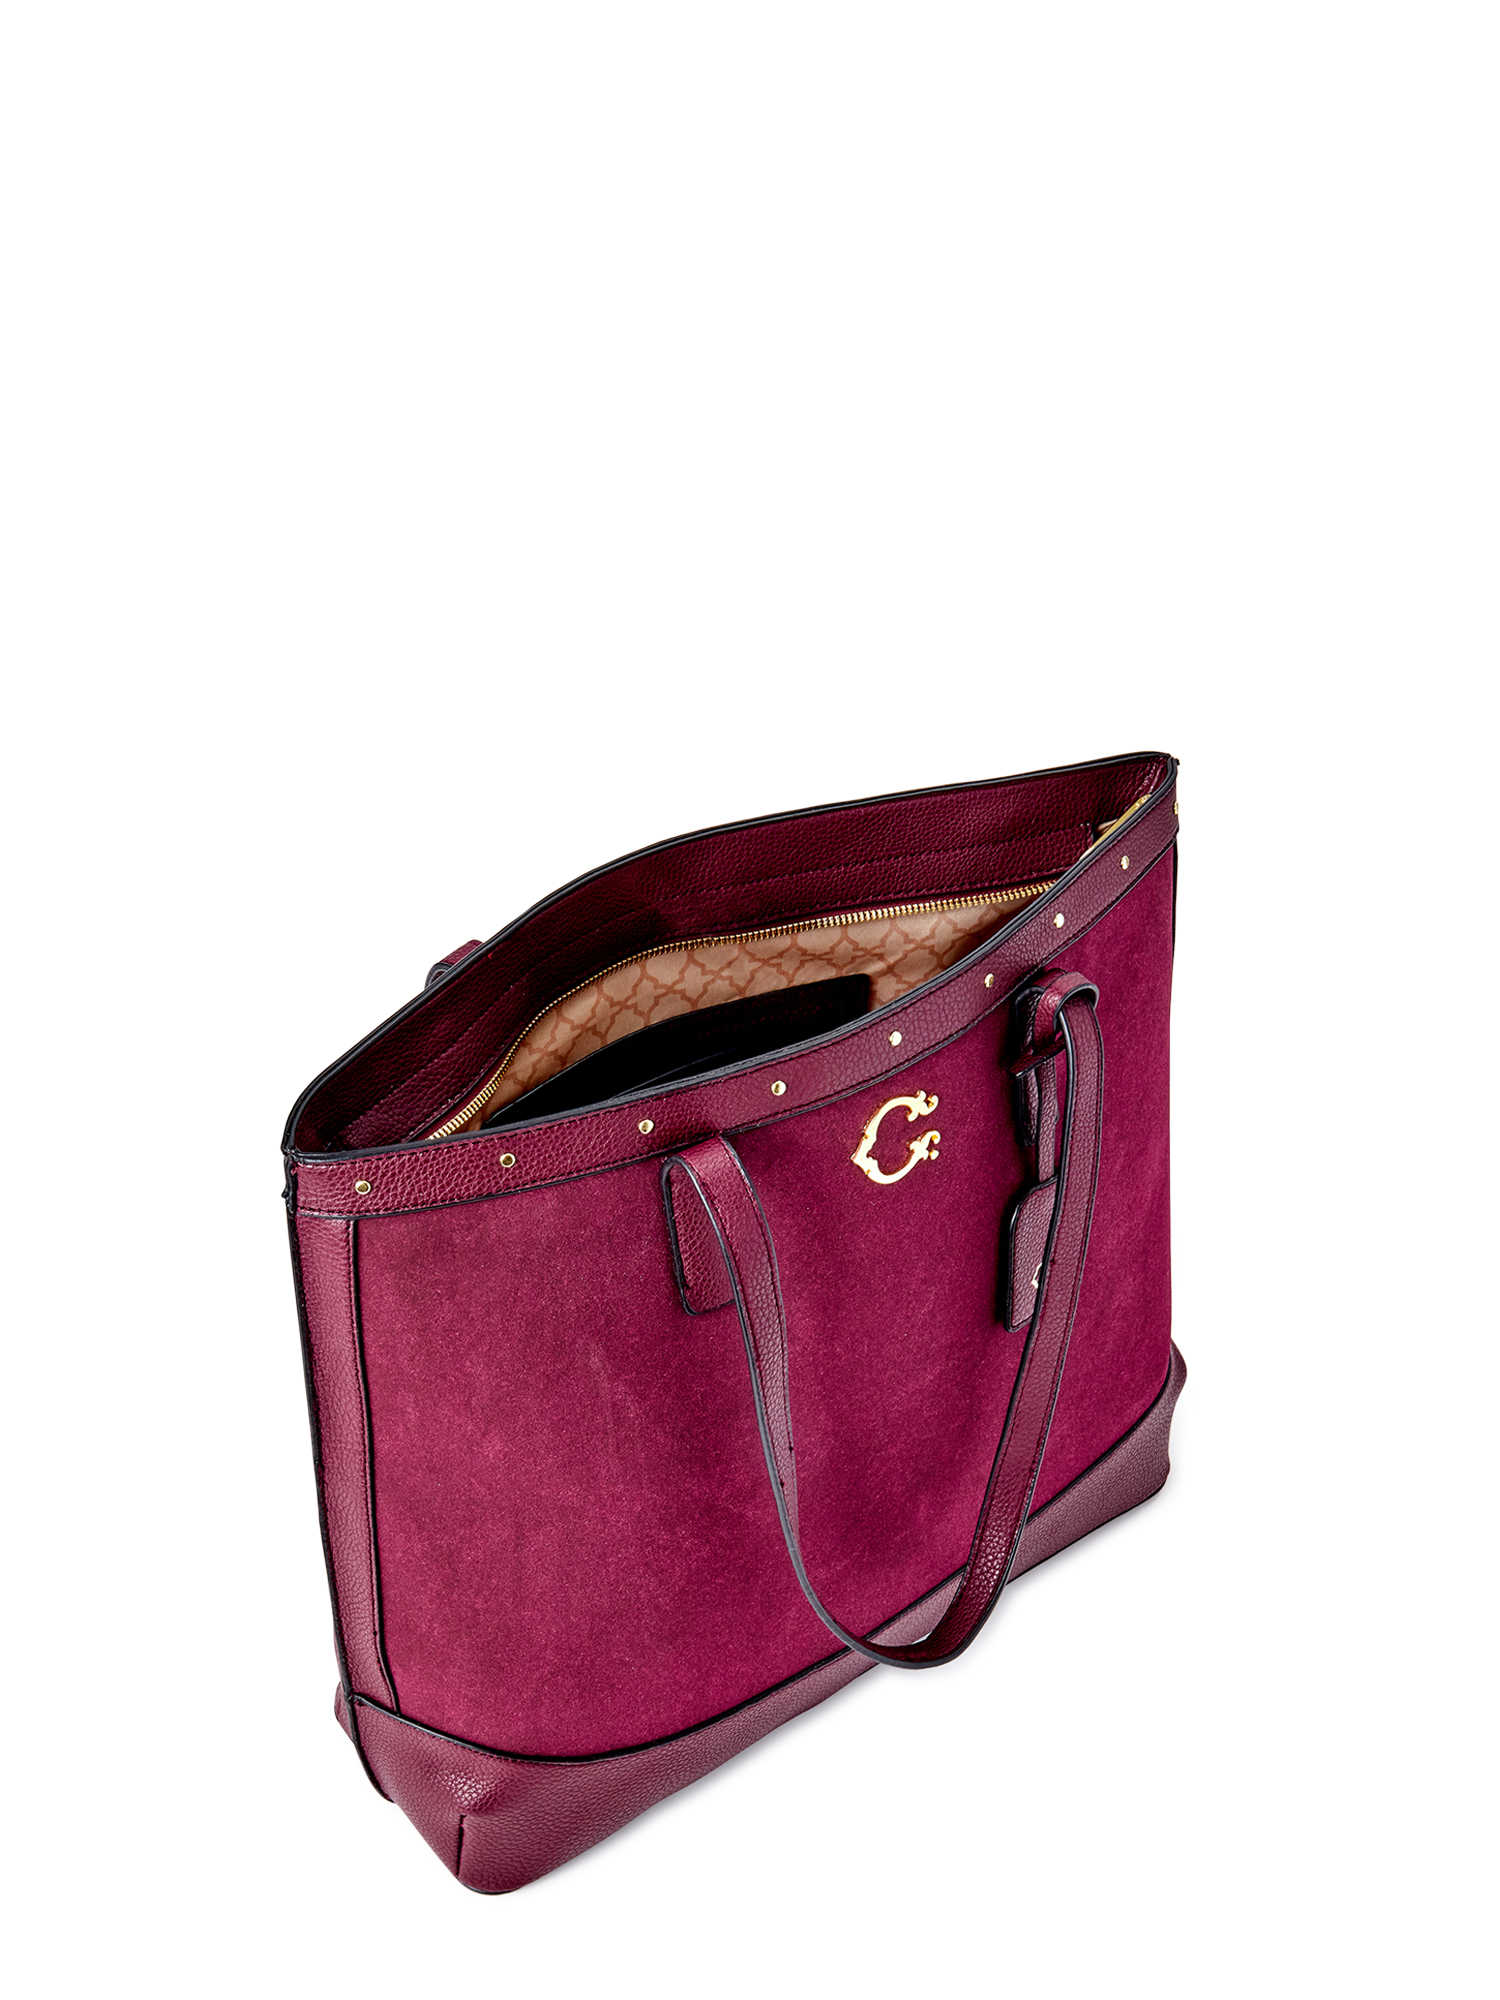 C. Wonder Women's Emma Faux Suede Studded Tote Bag Wine - image 5 of 5